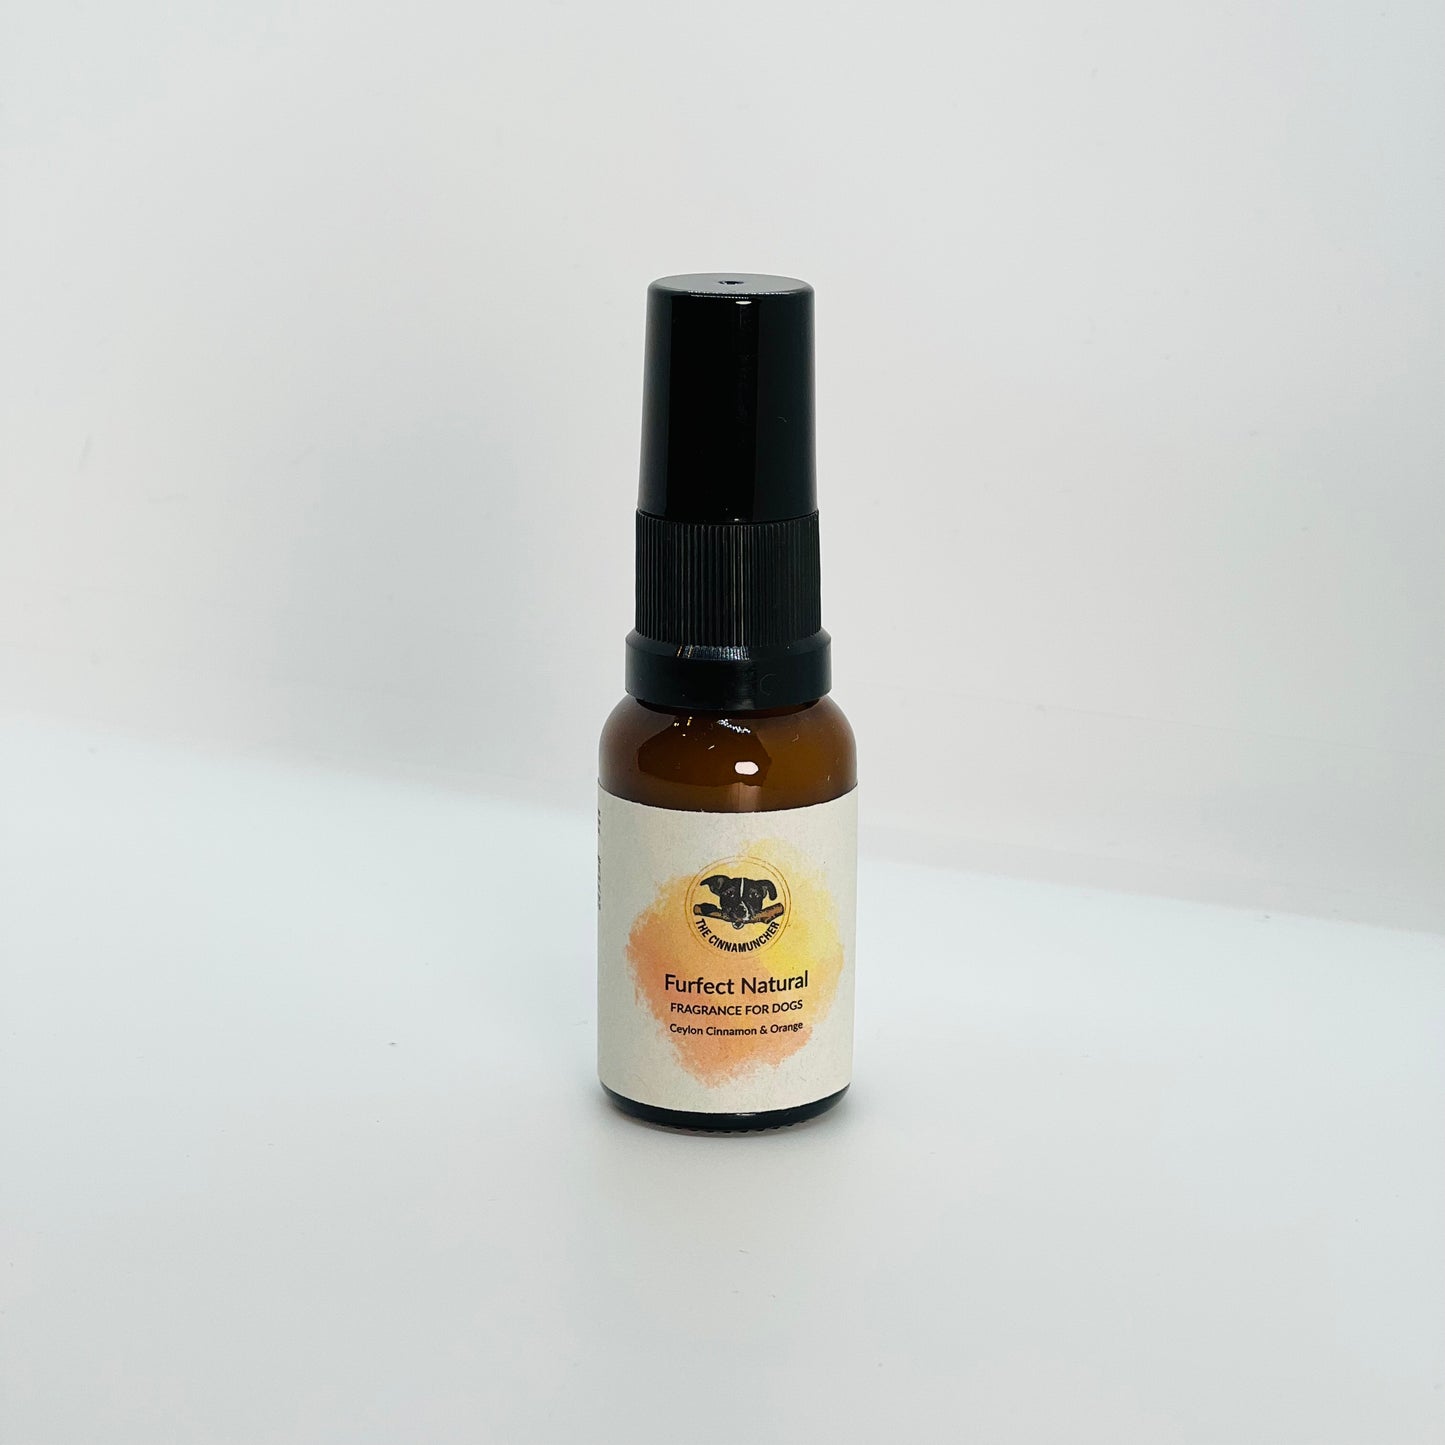 Furfect Natural Fragrance For Dogs with Ceylon Cinnamon & Orange